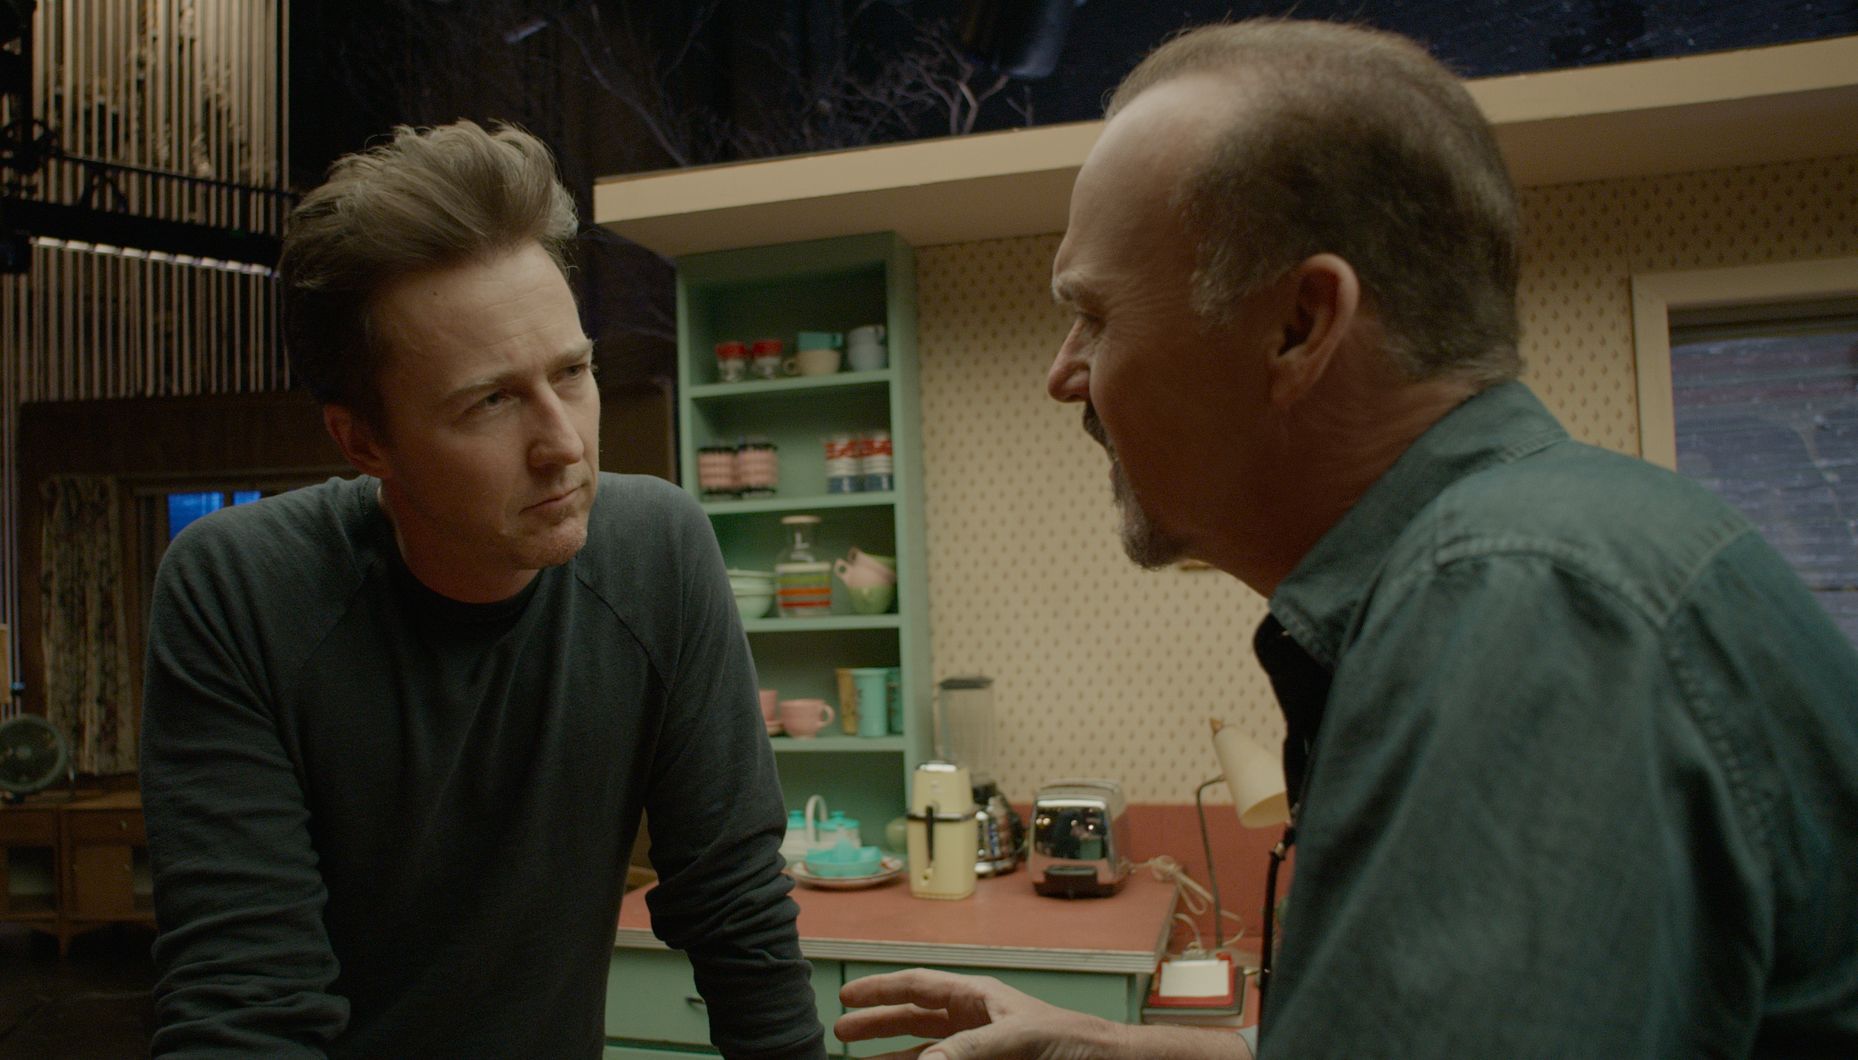 Michael Keaton and Edward Norton having a discussion in Bird